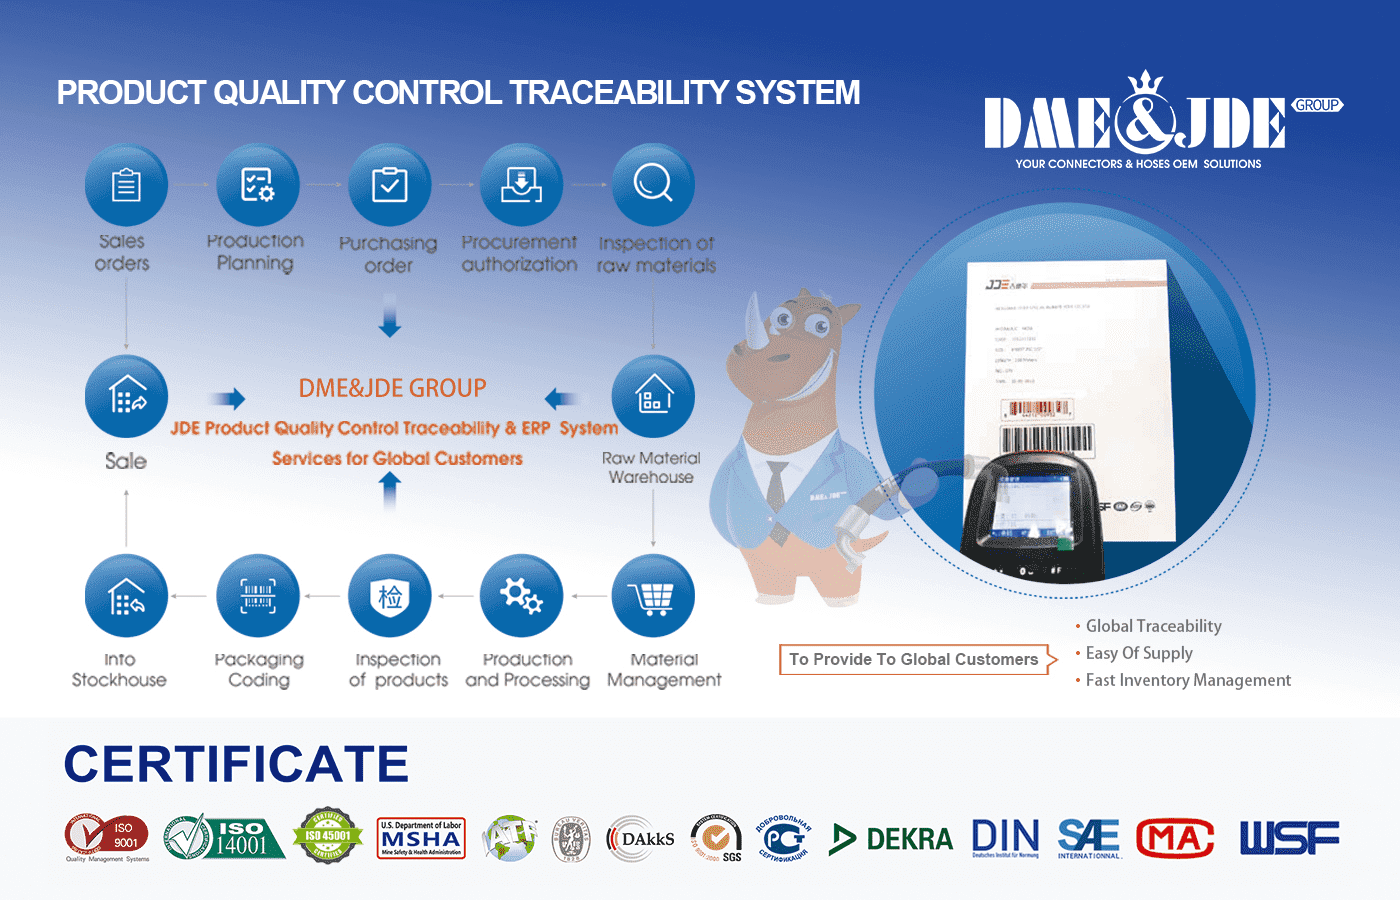 The whole process of products quality control traceability system.